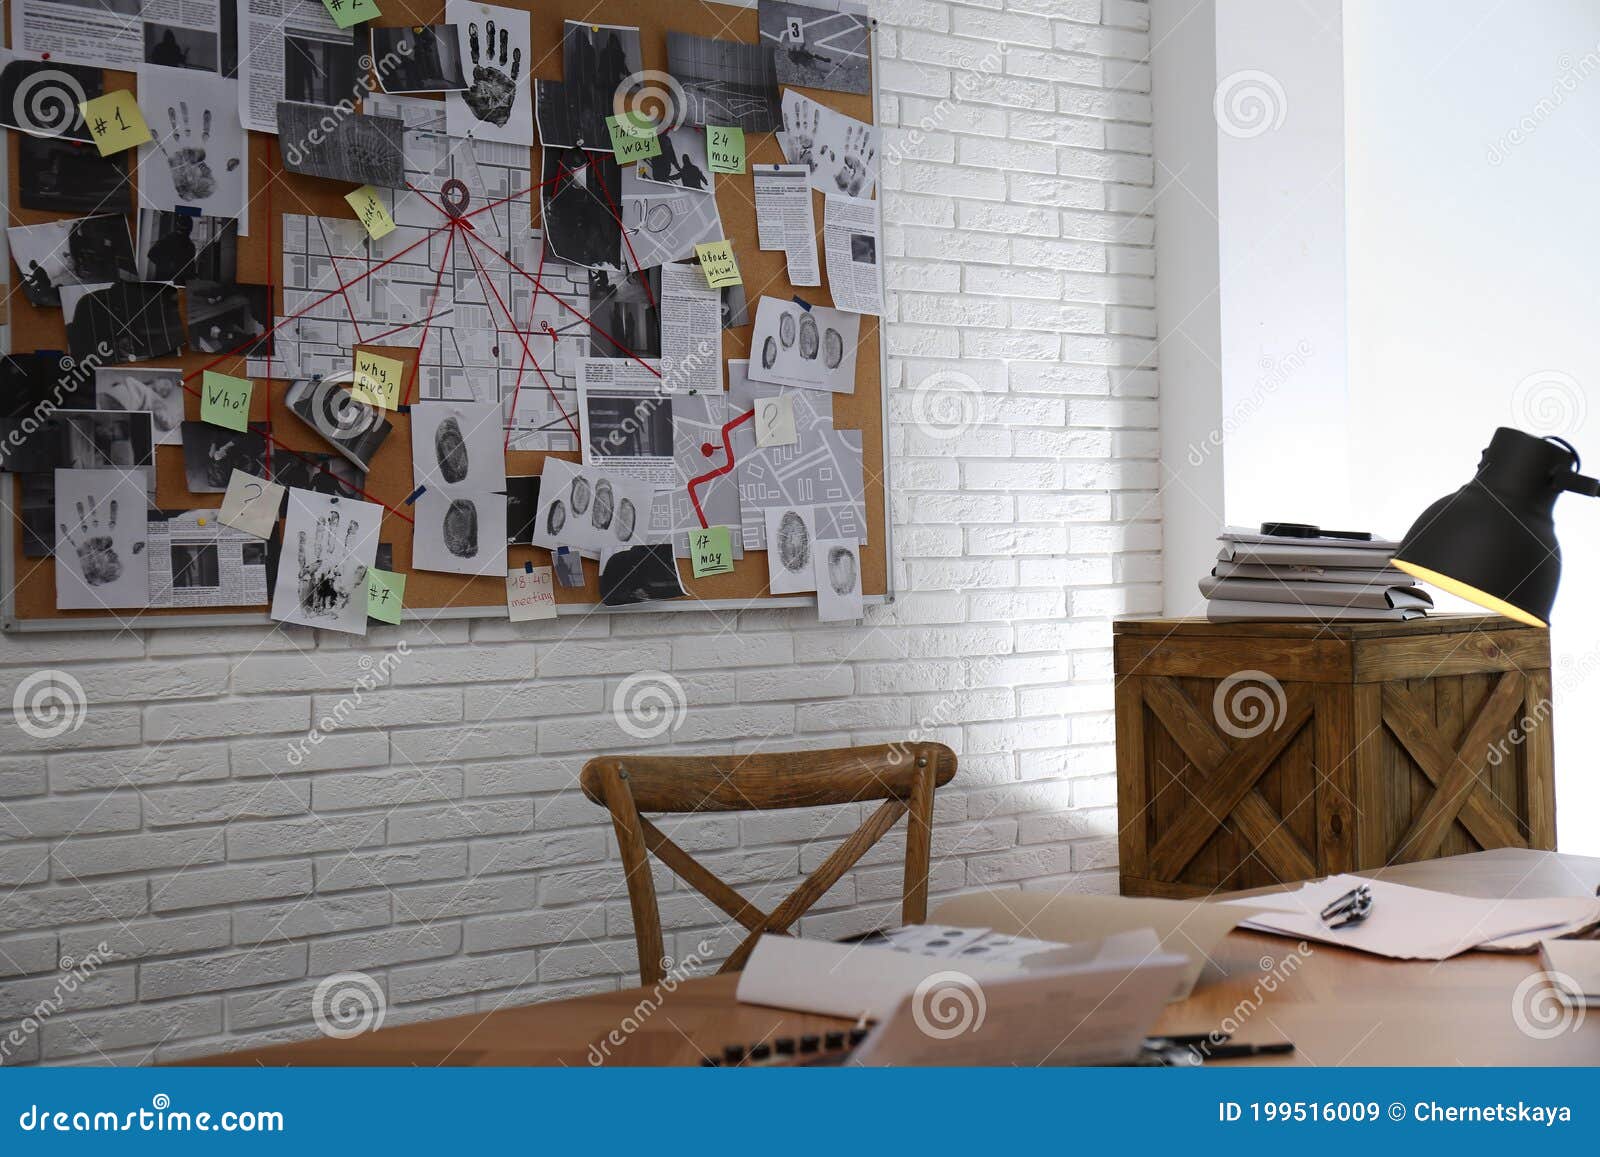 Detective Office Interior with Workplace and Investigation Board Stock ...